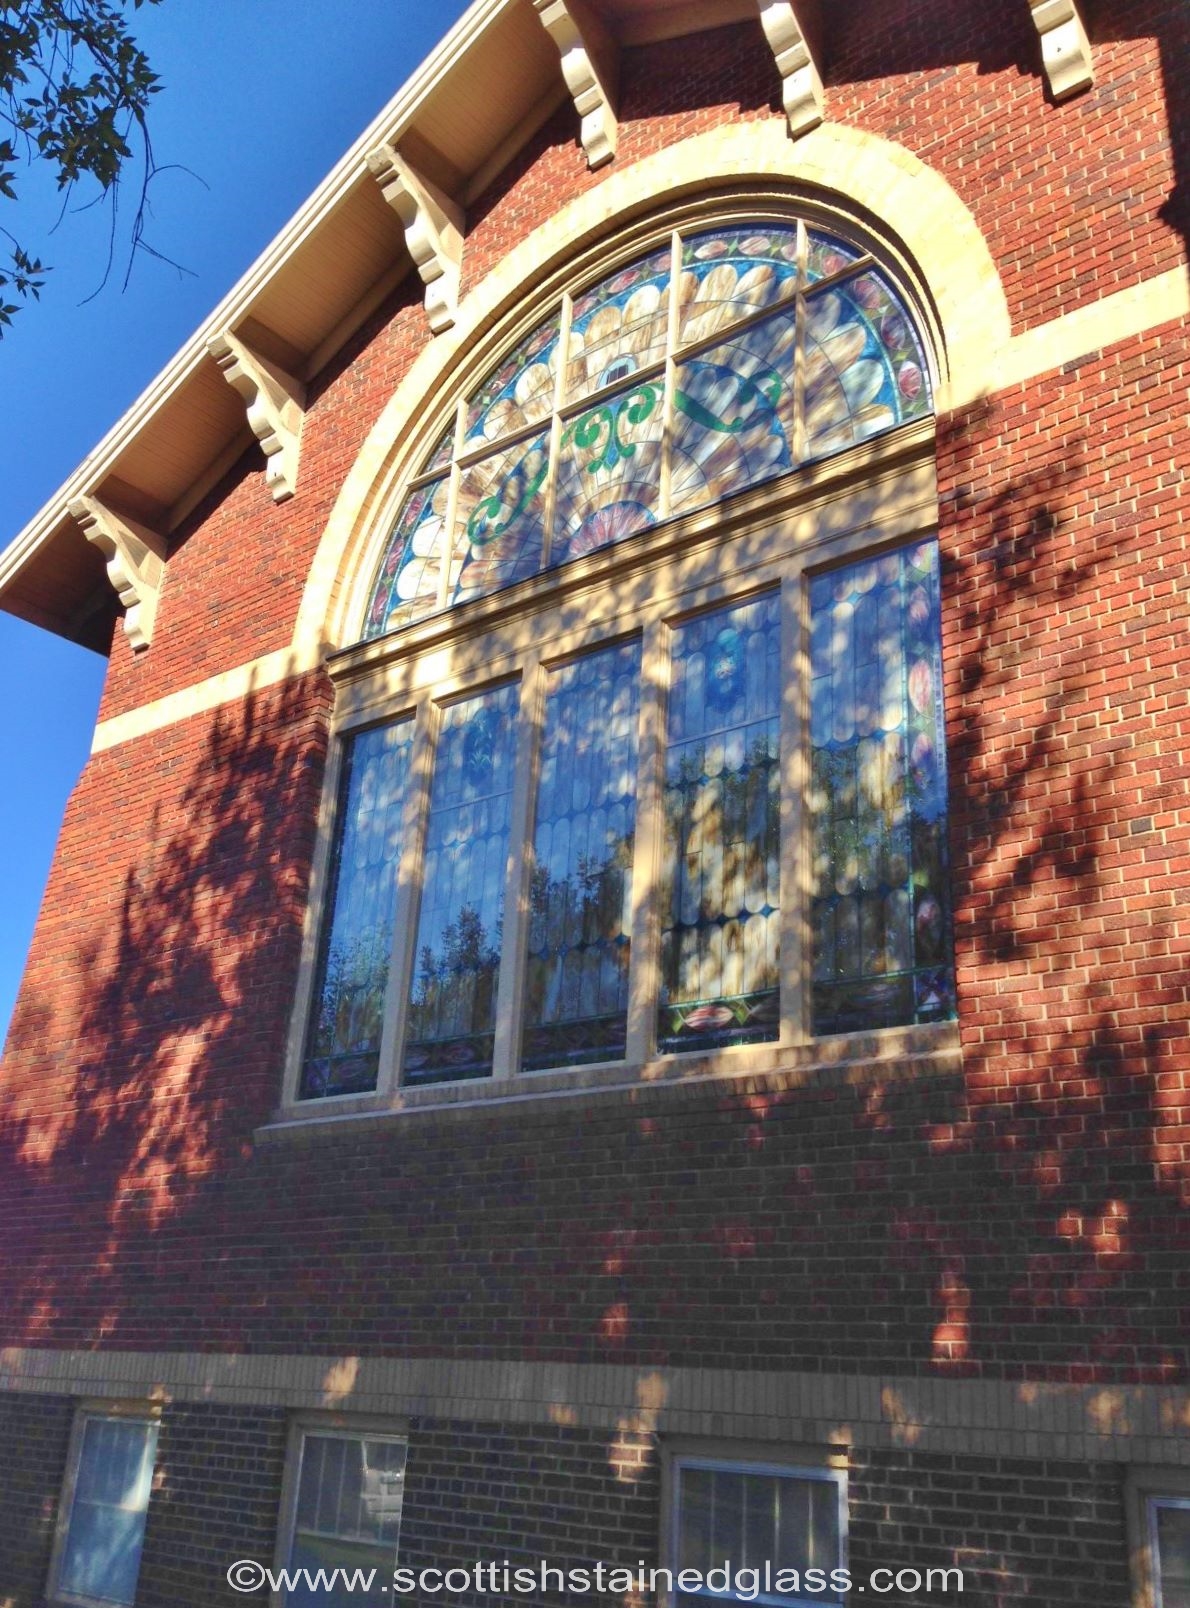 Basement stained glass window in a historic Houston home with visible cracks and deterioration